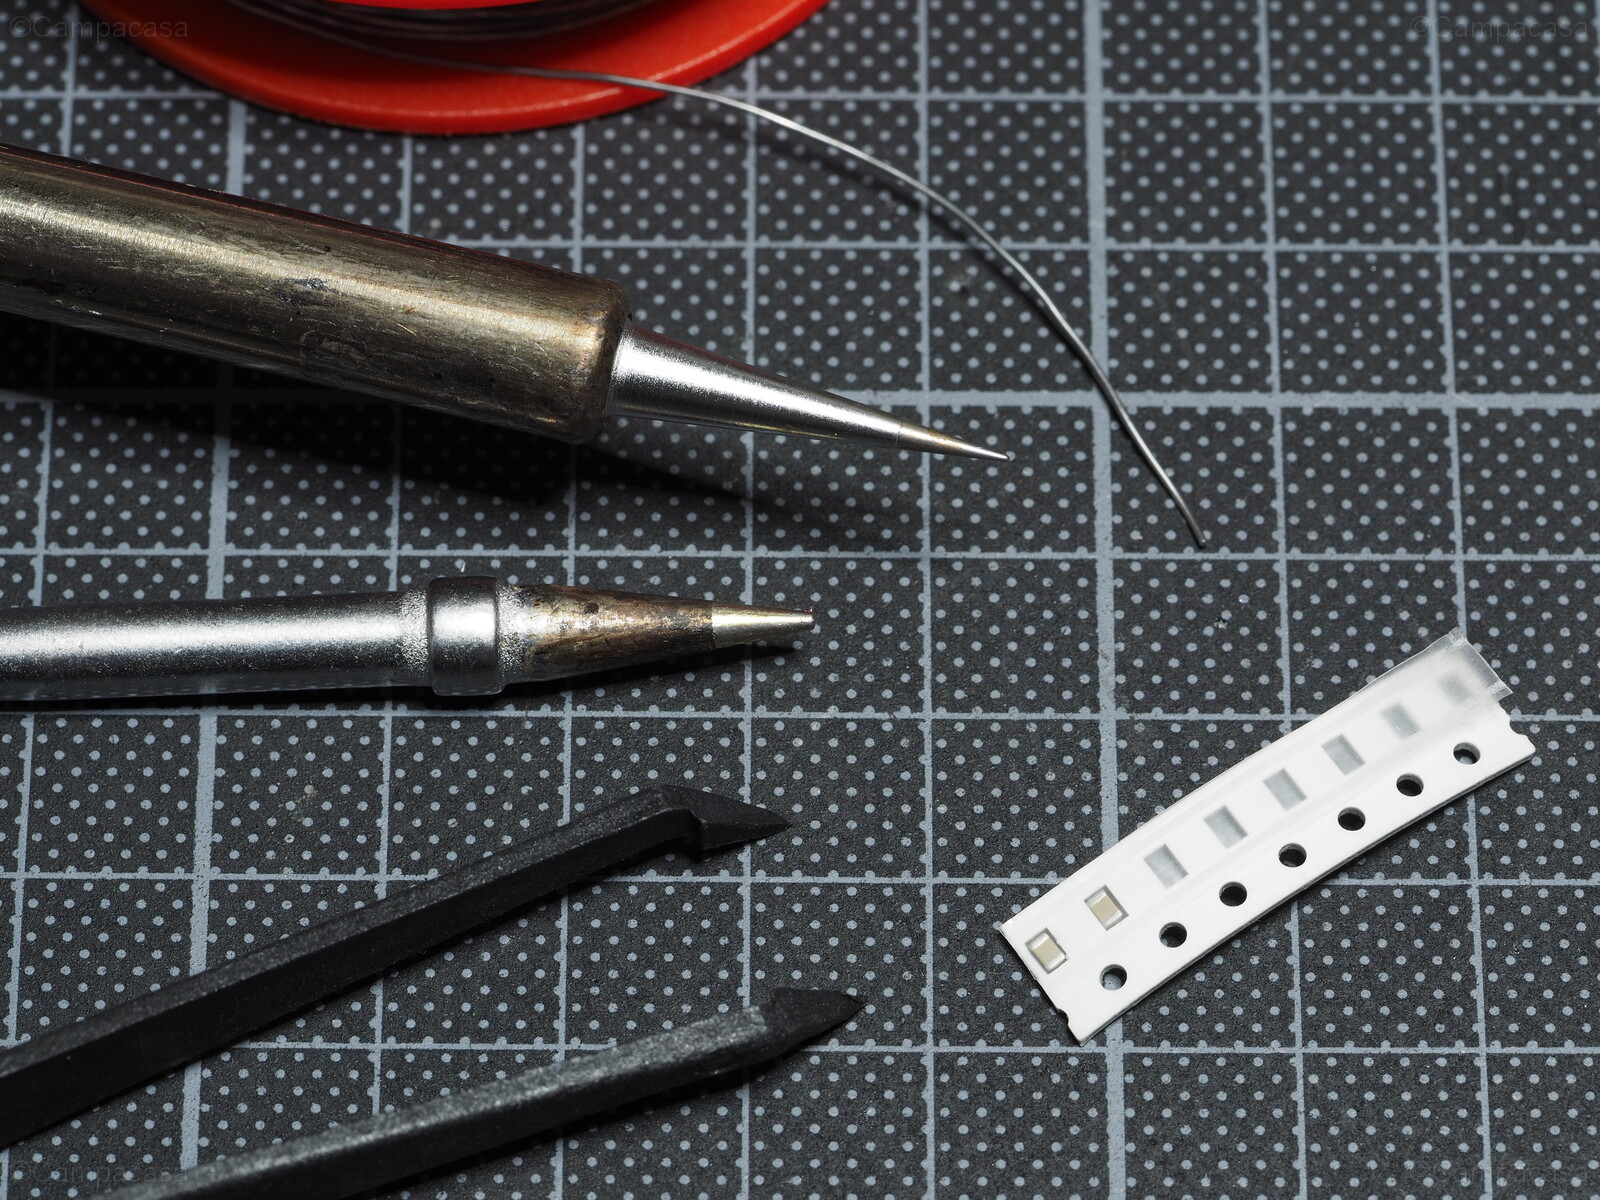 Soldering Tools for the SMD Capacitors